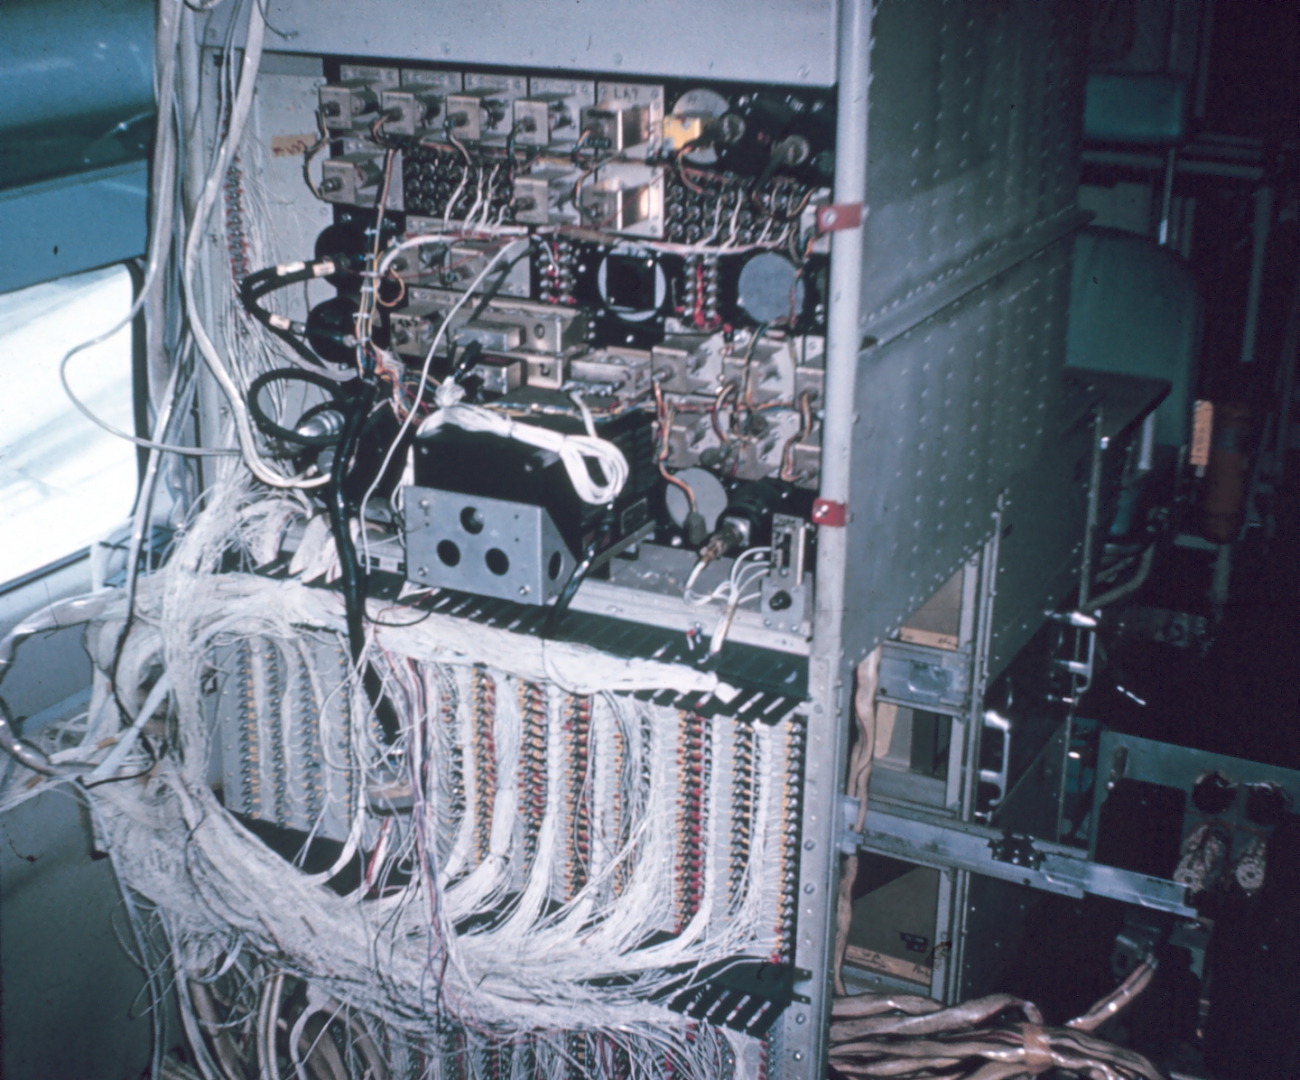 Guts of the digital system